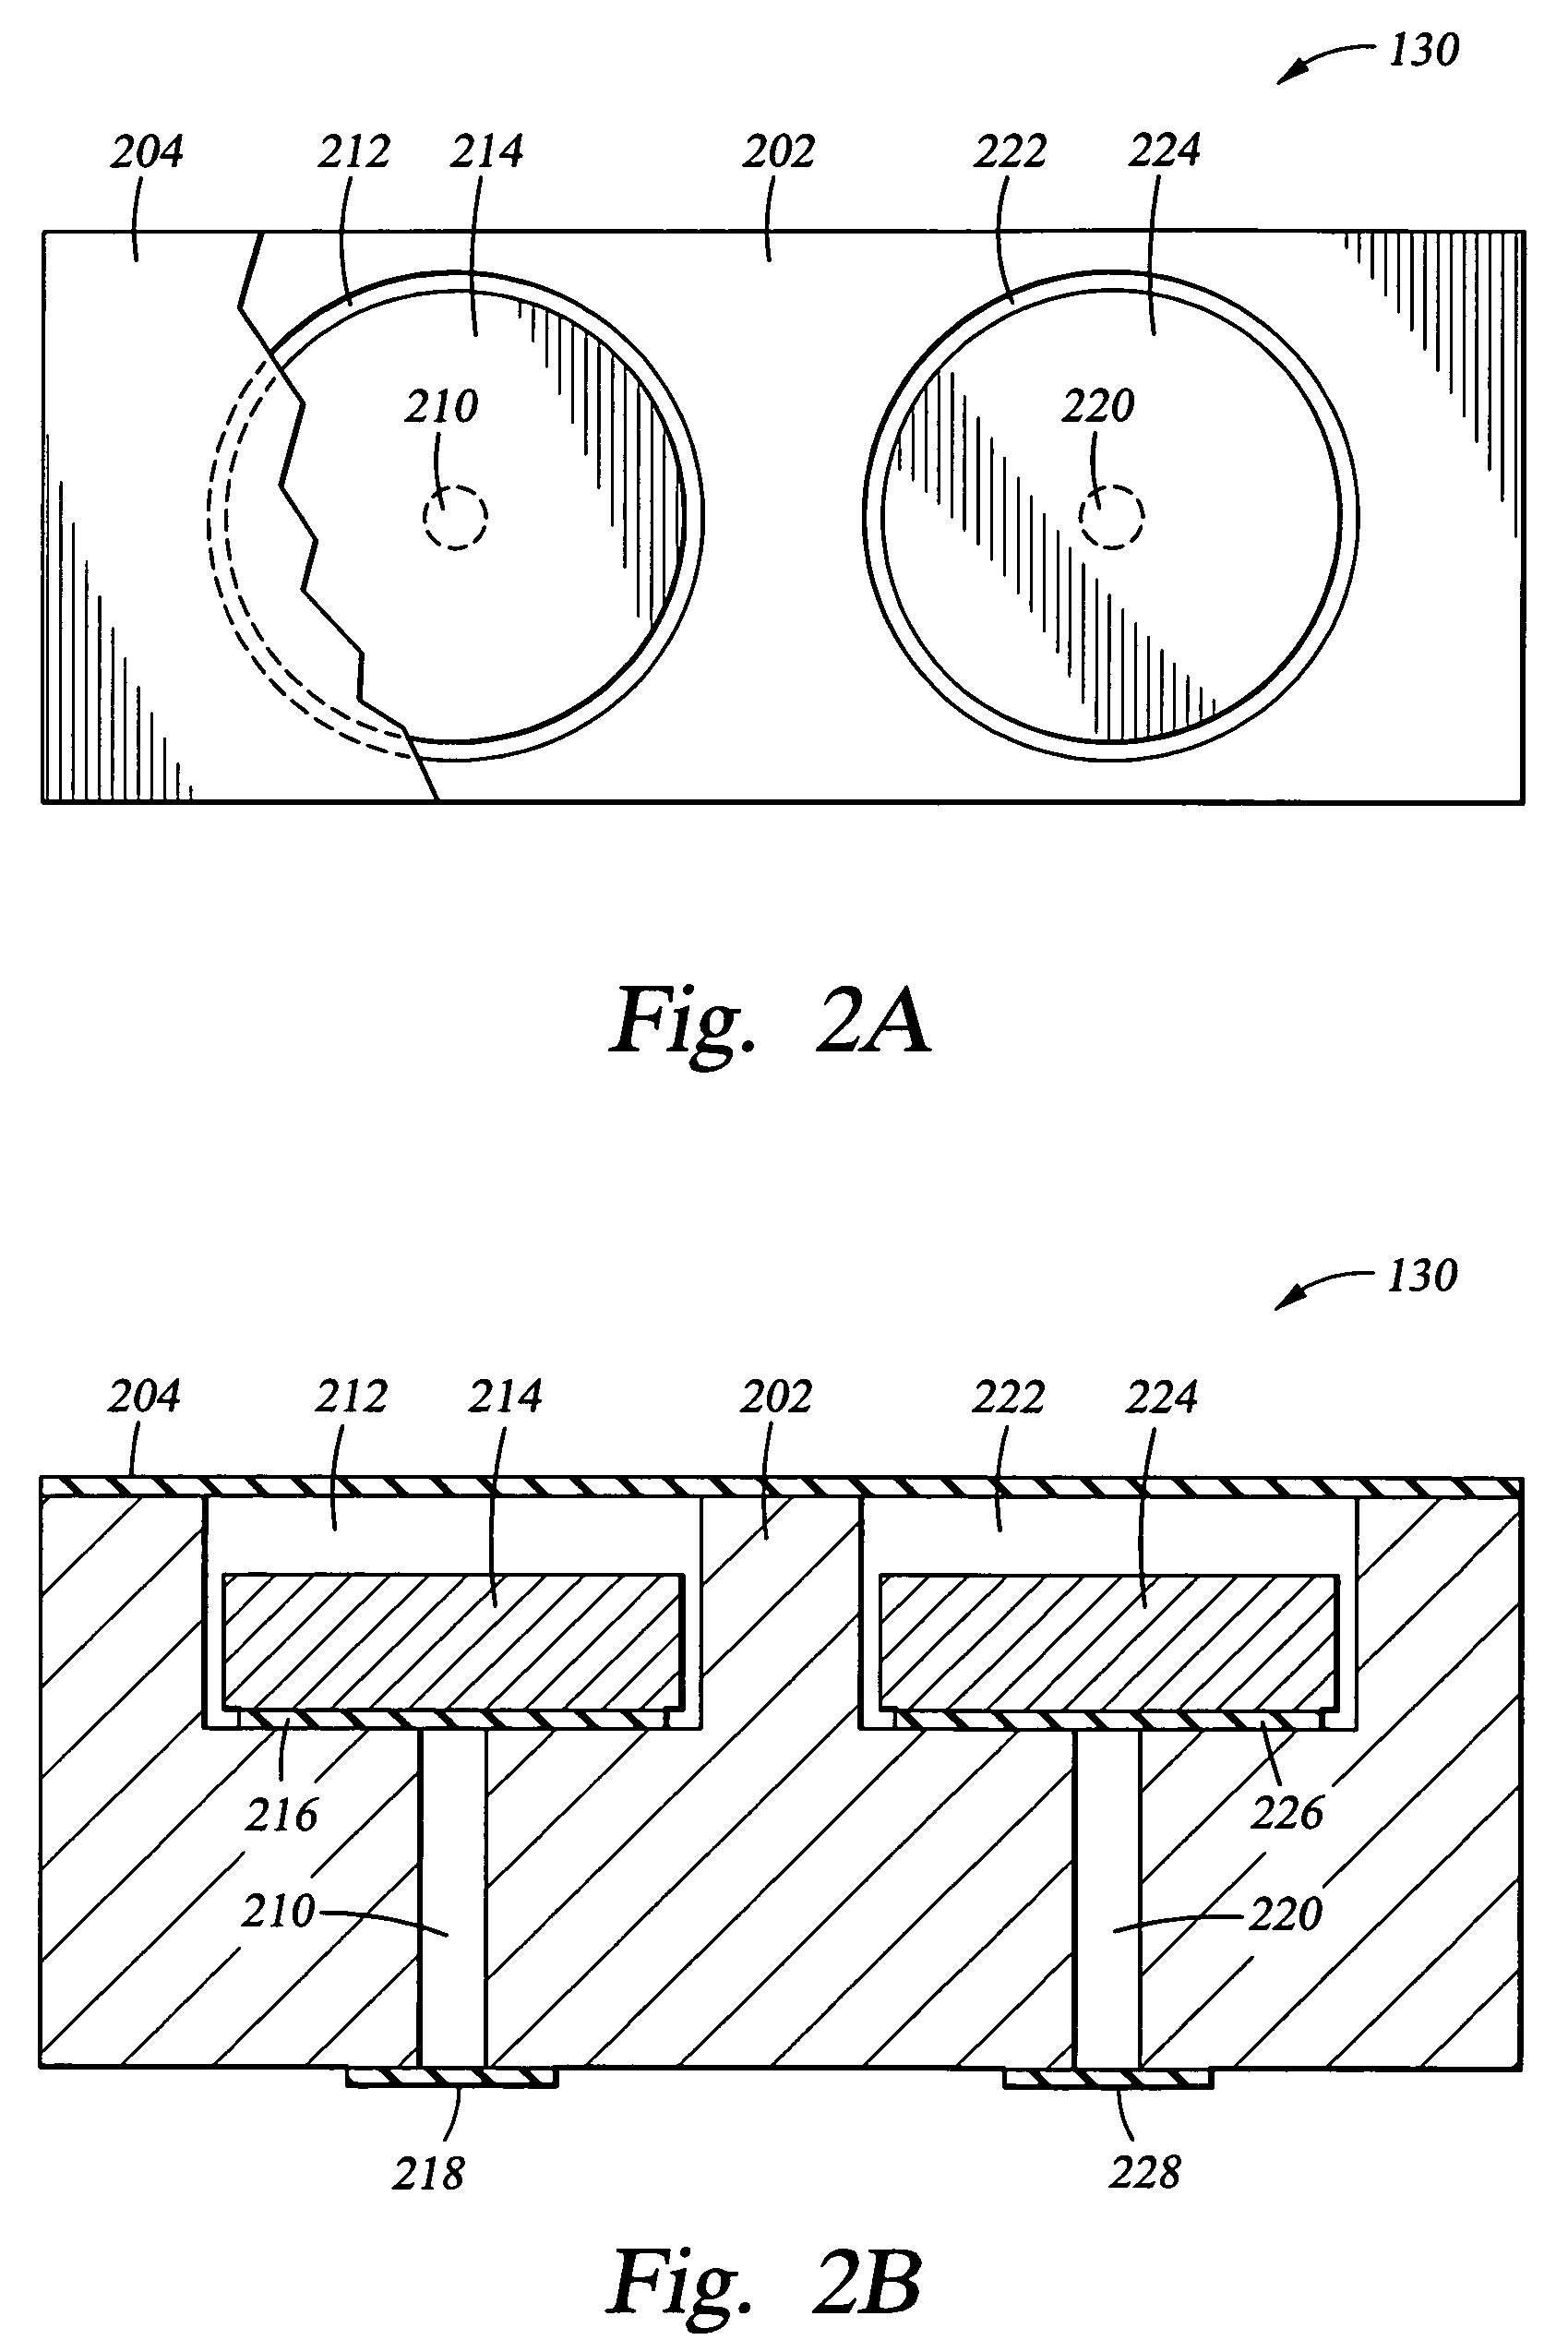 Control system to regulate the concentration of vapor in a hard disk drive